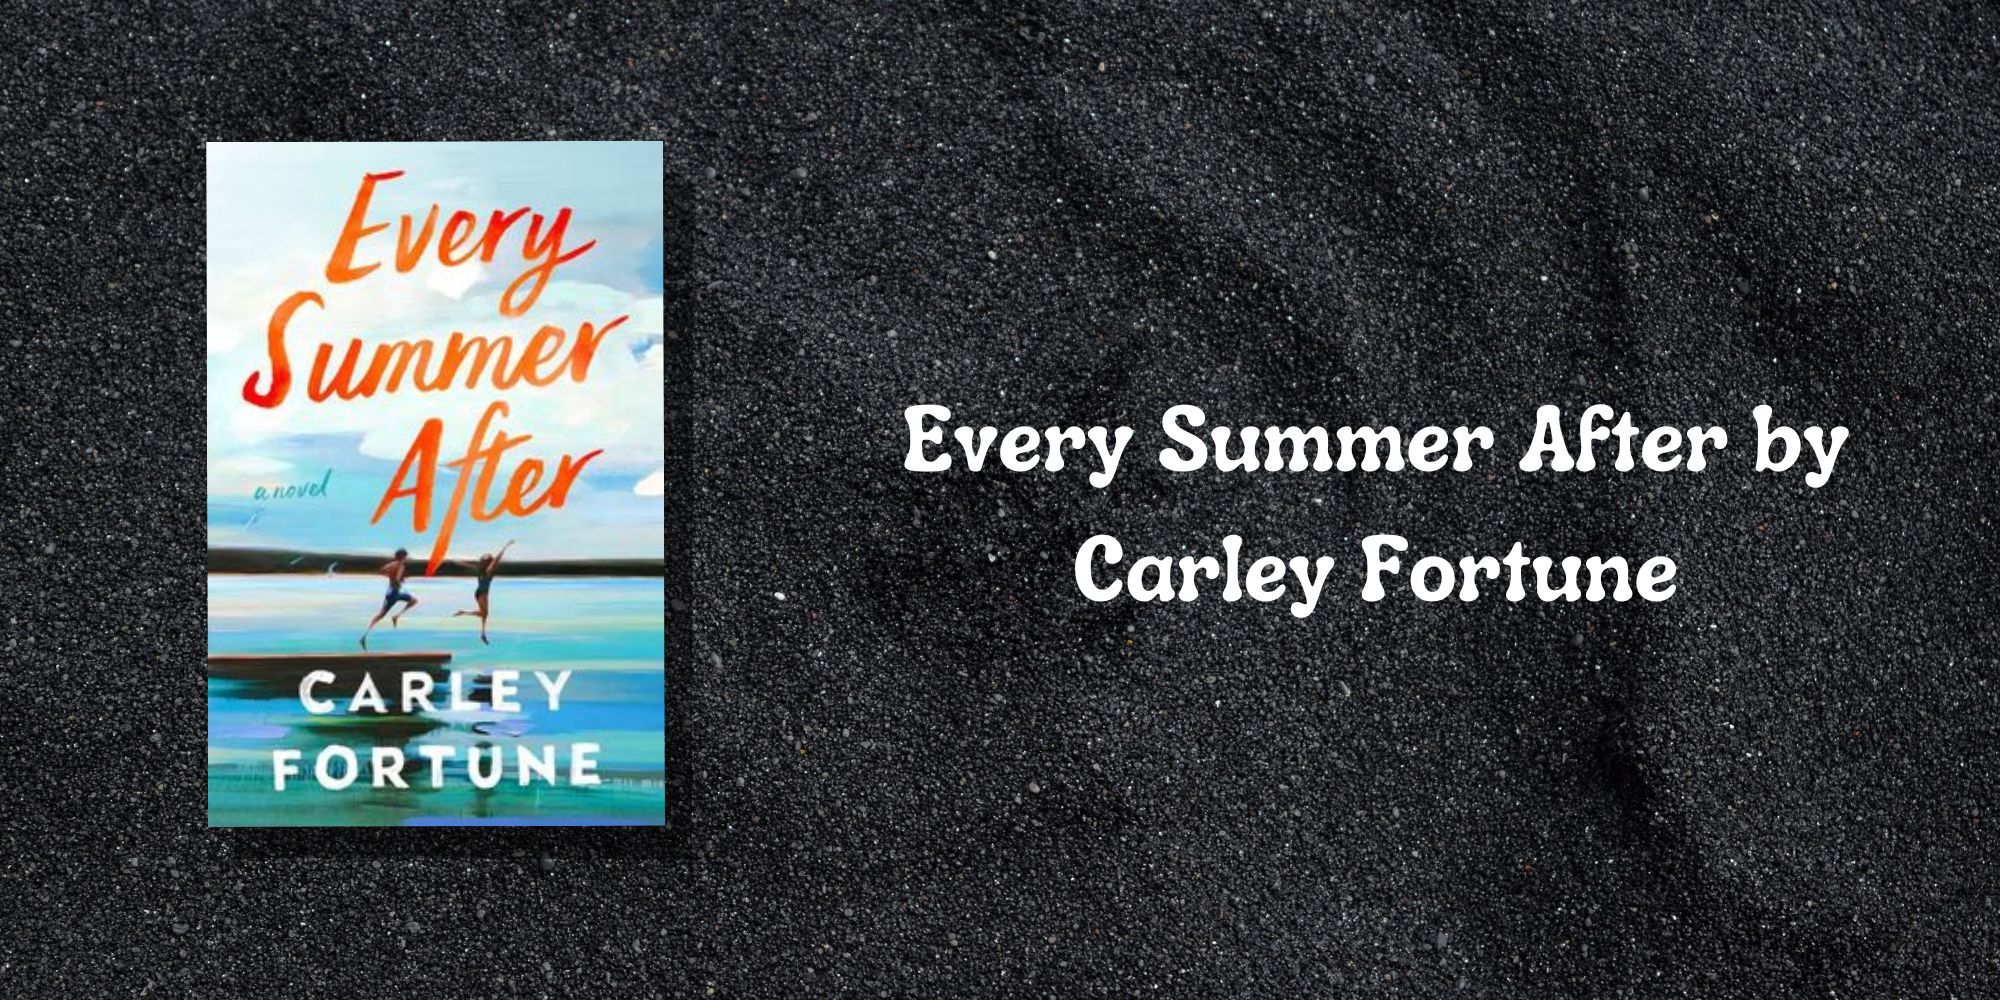 The title of Every Summer After by Carly Fortune